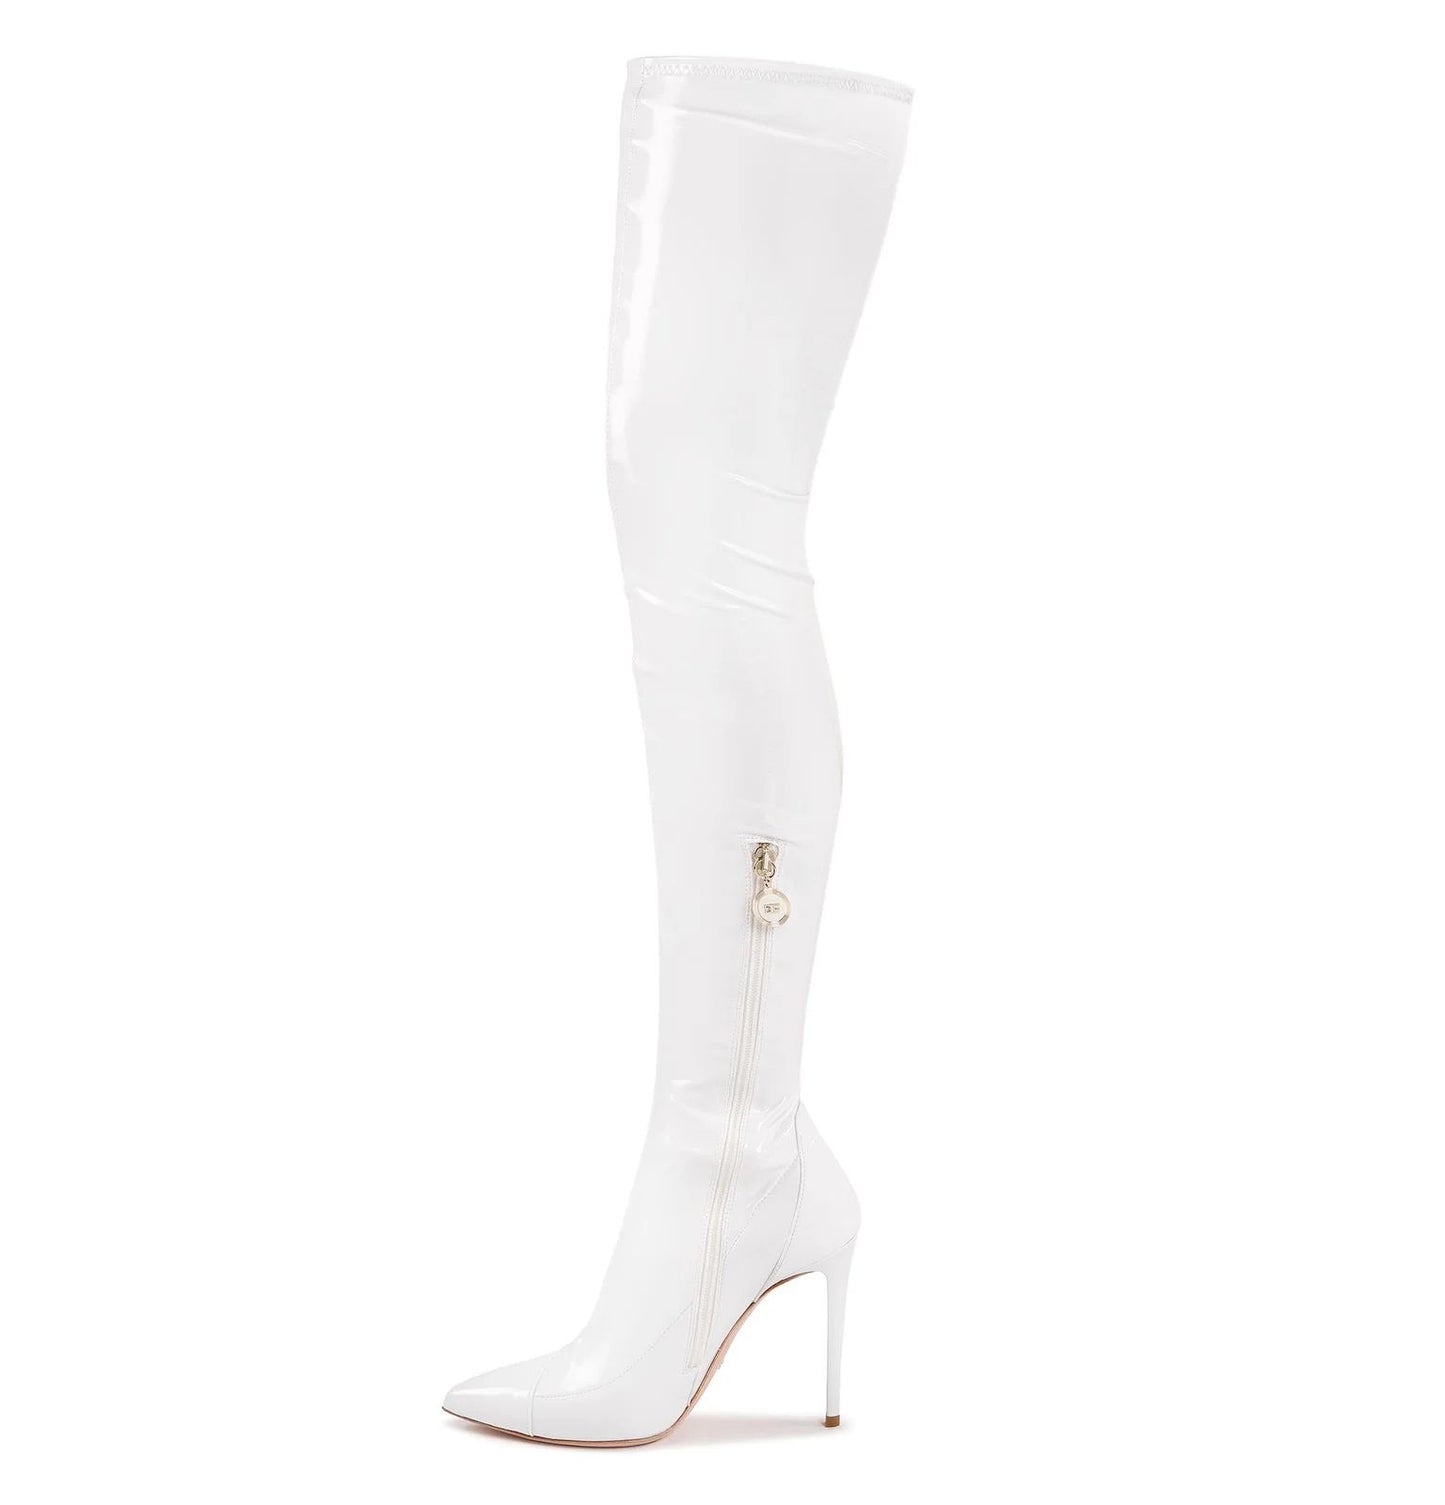 Elegant Pointed White Boots with Coated Finish